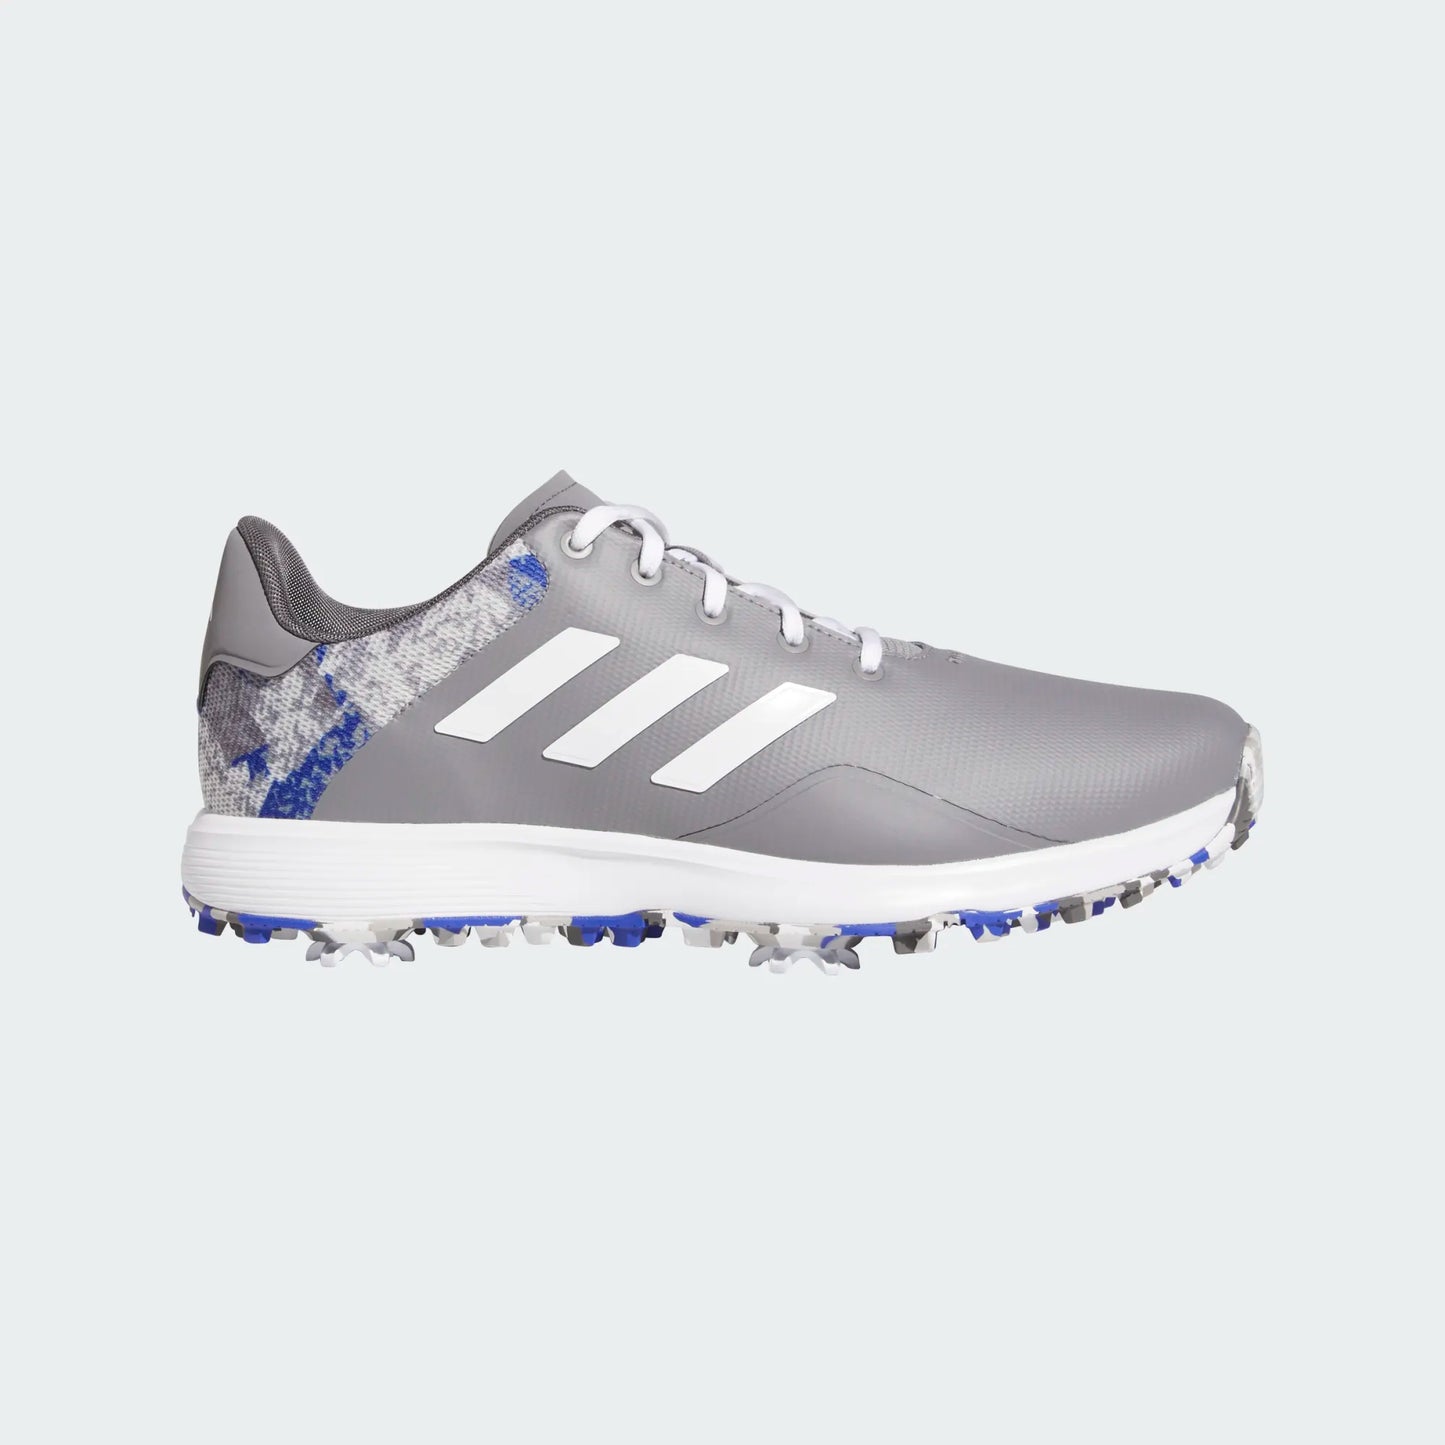 Men's S2G 23 Golf Shoes - Grey with Blue